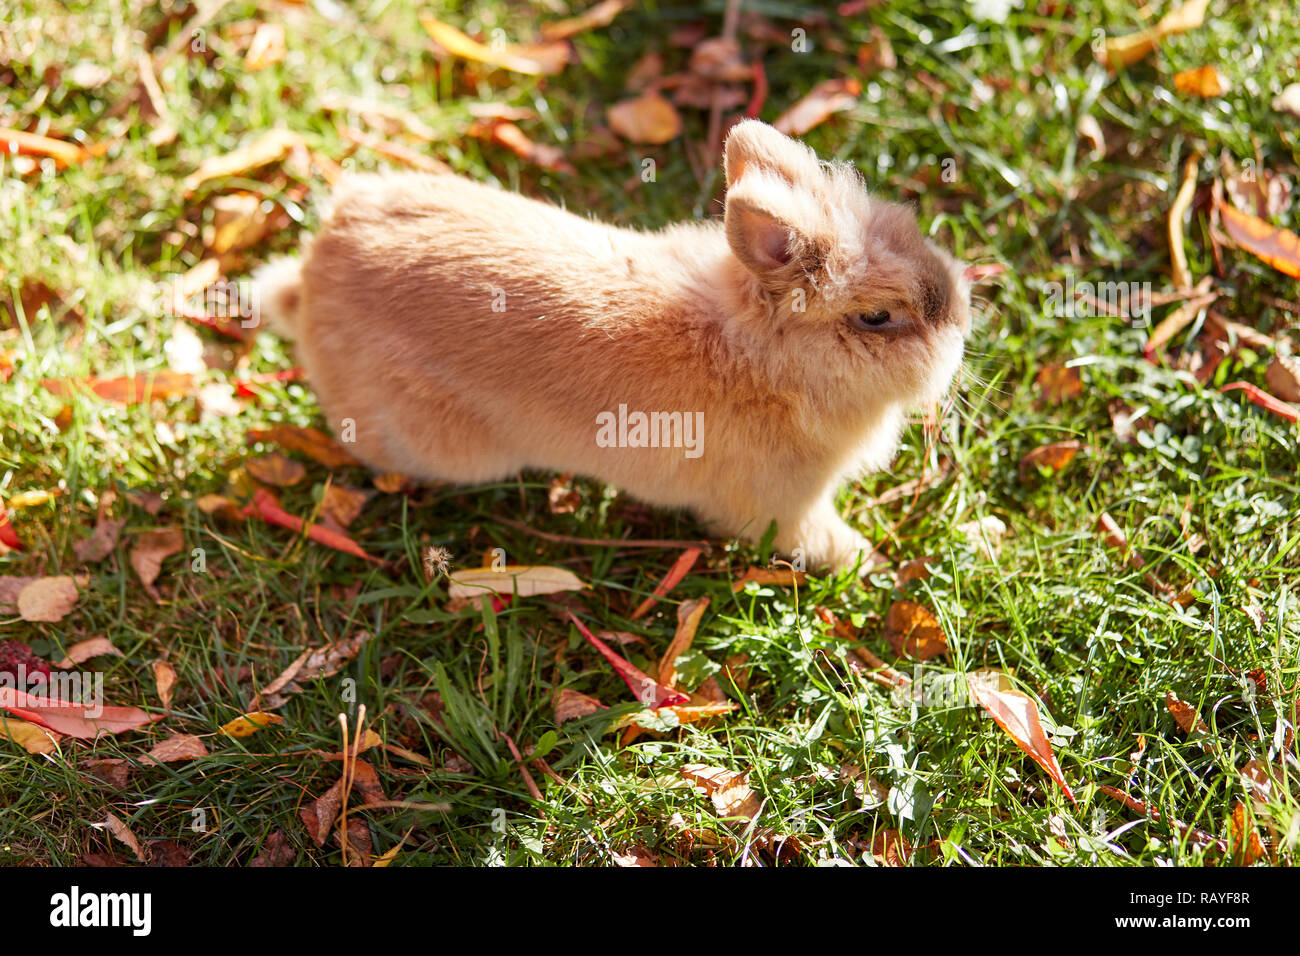 Cute bunny on the grass in the garden Stock Photo